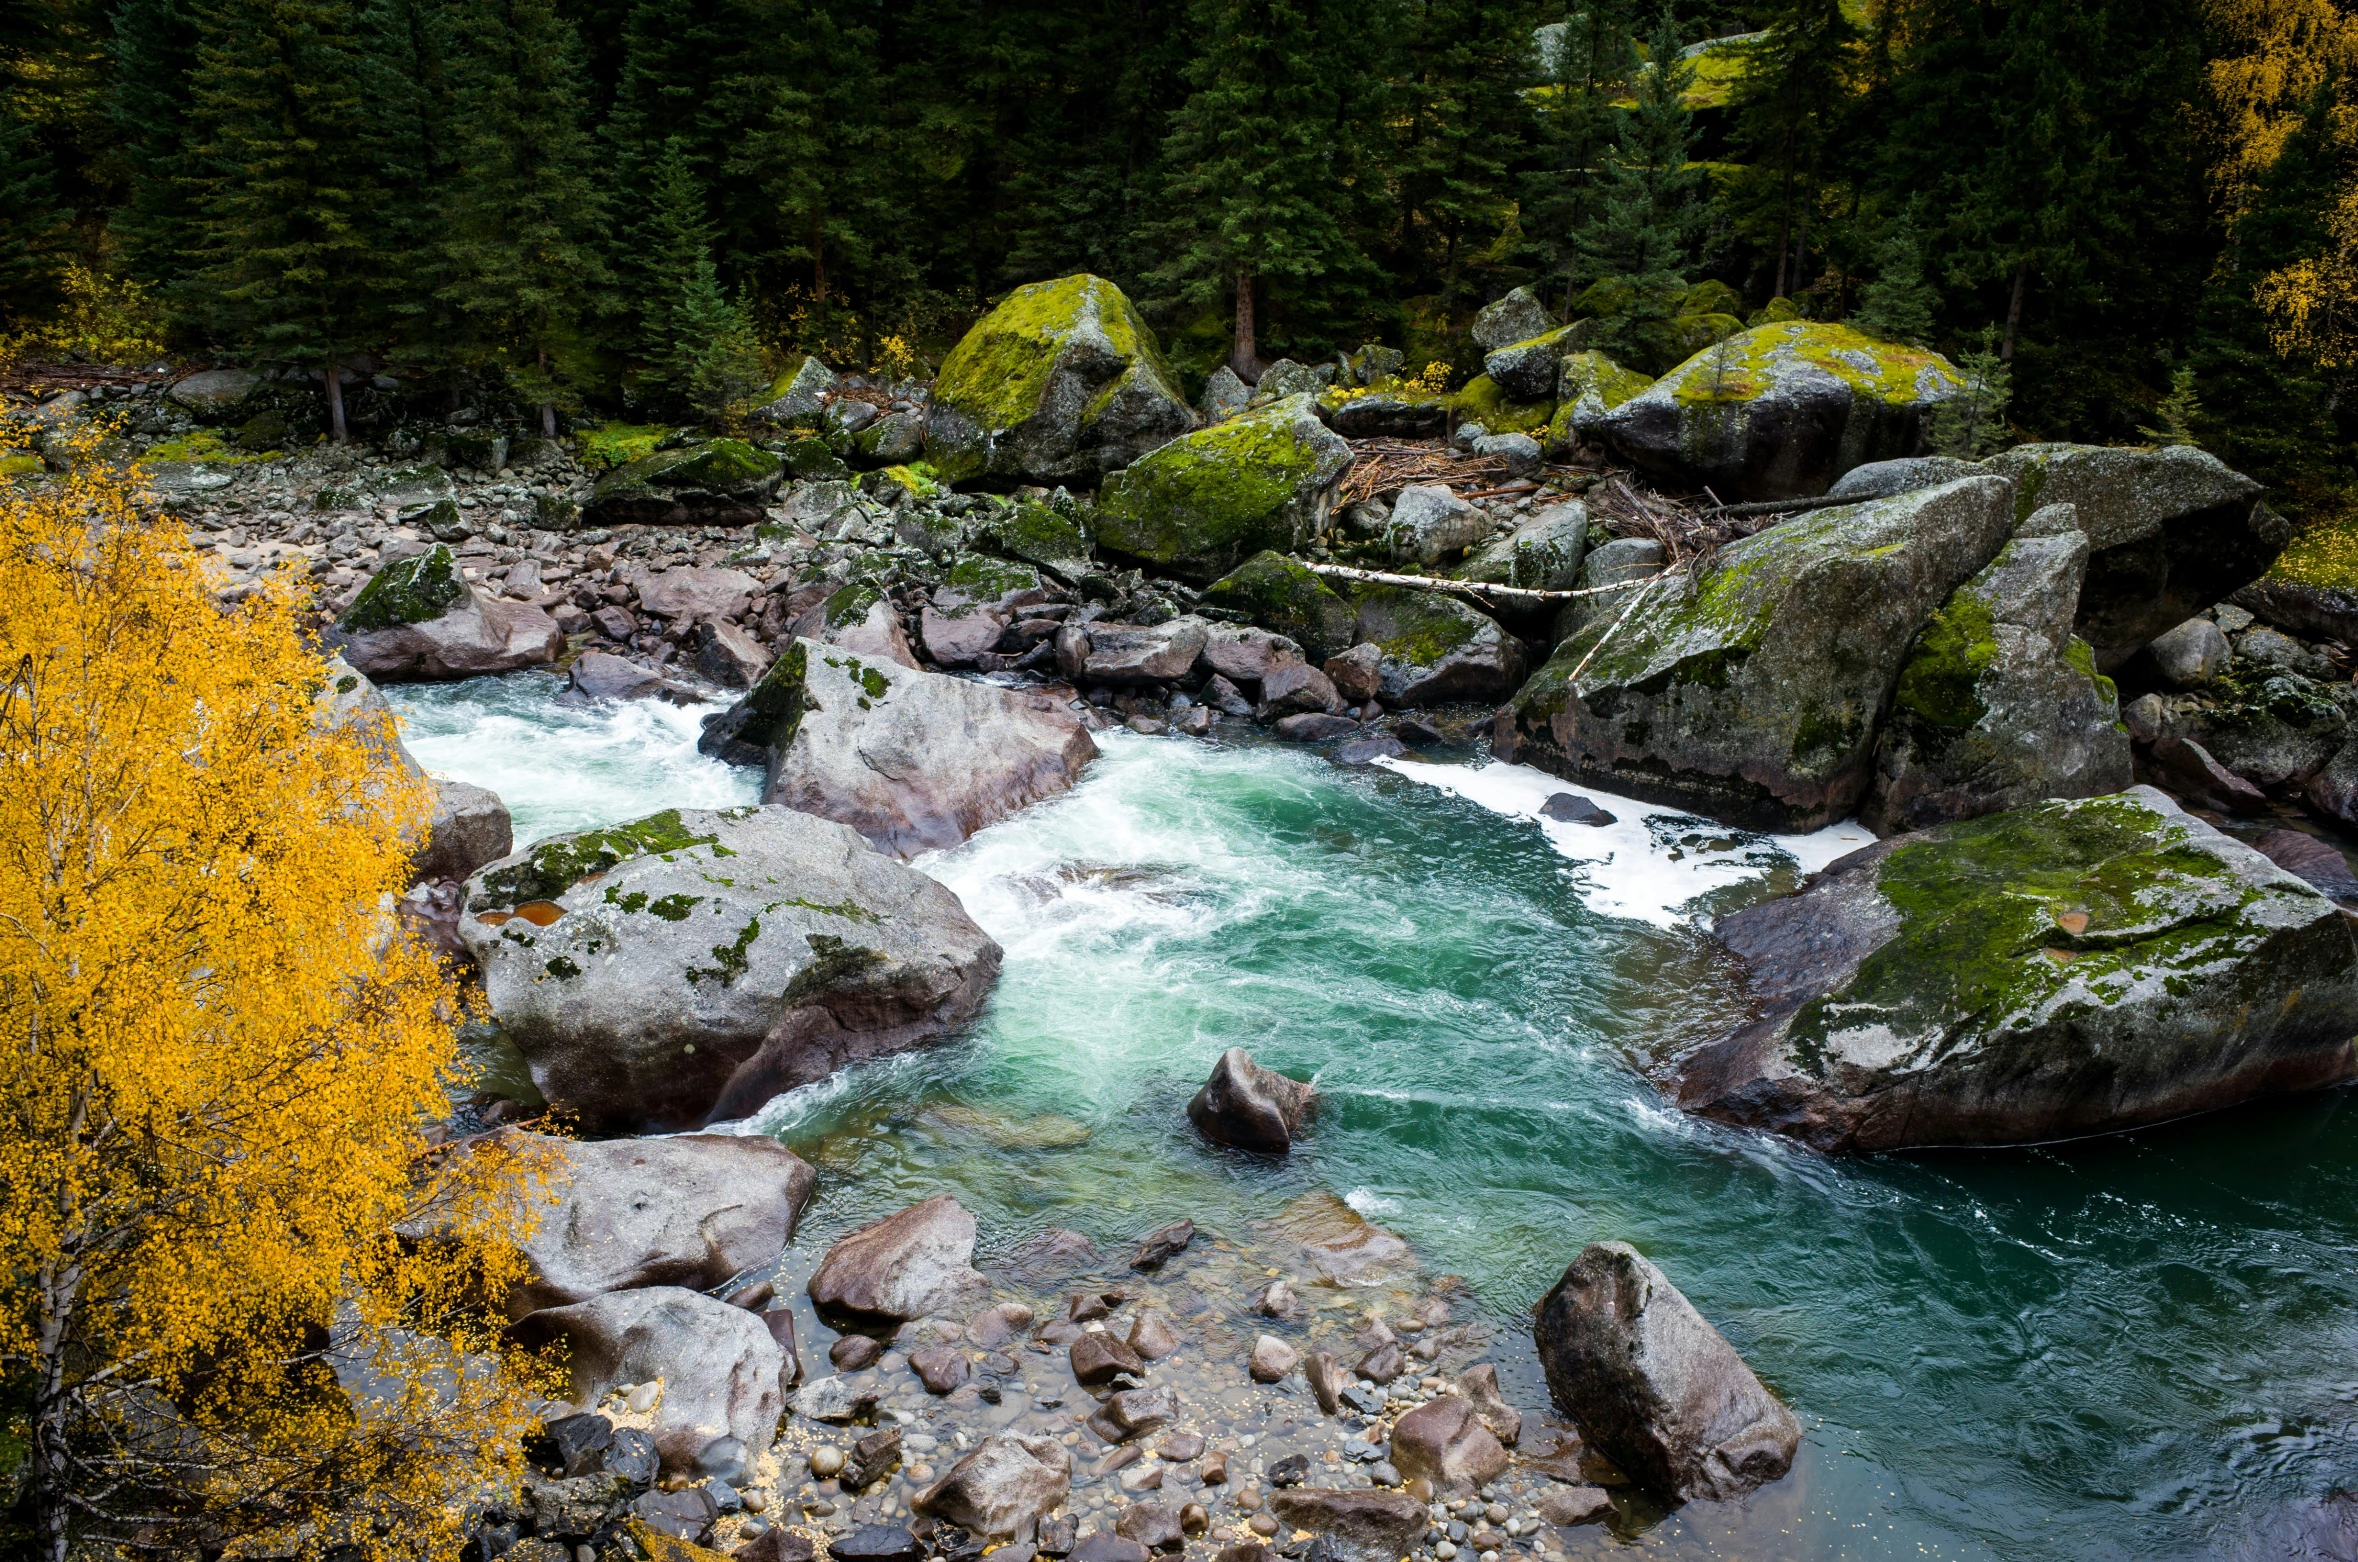 a river filled with rocks and water surrounded by green trees